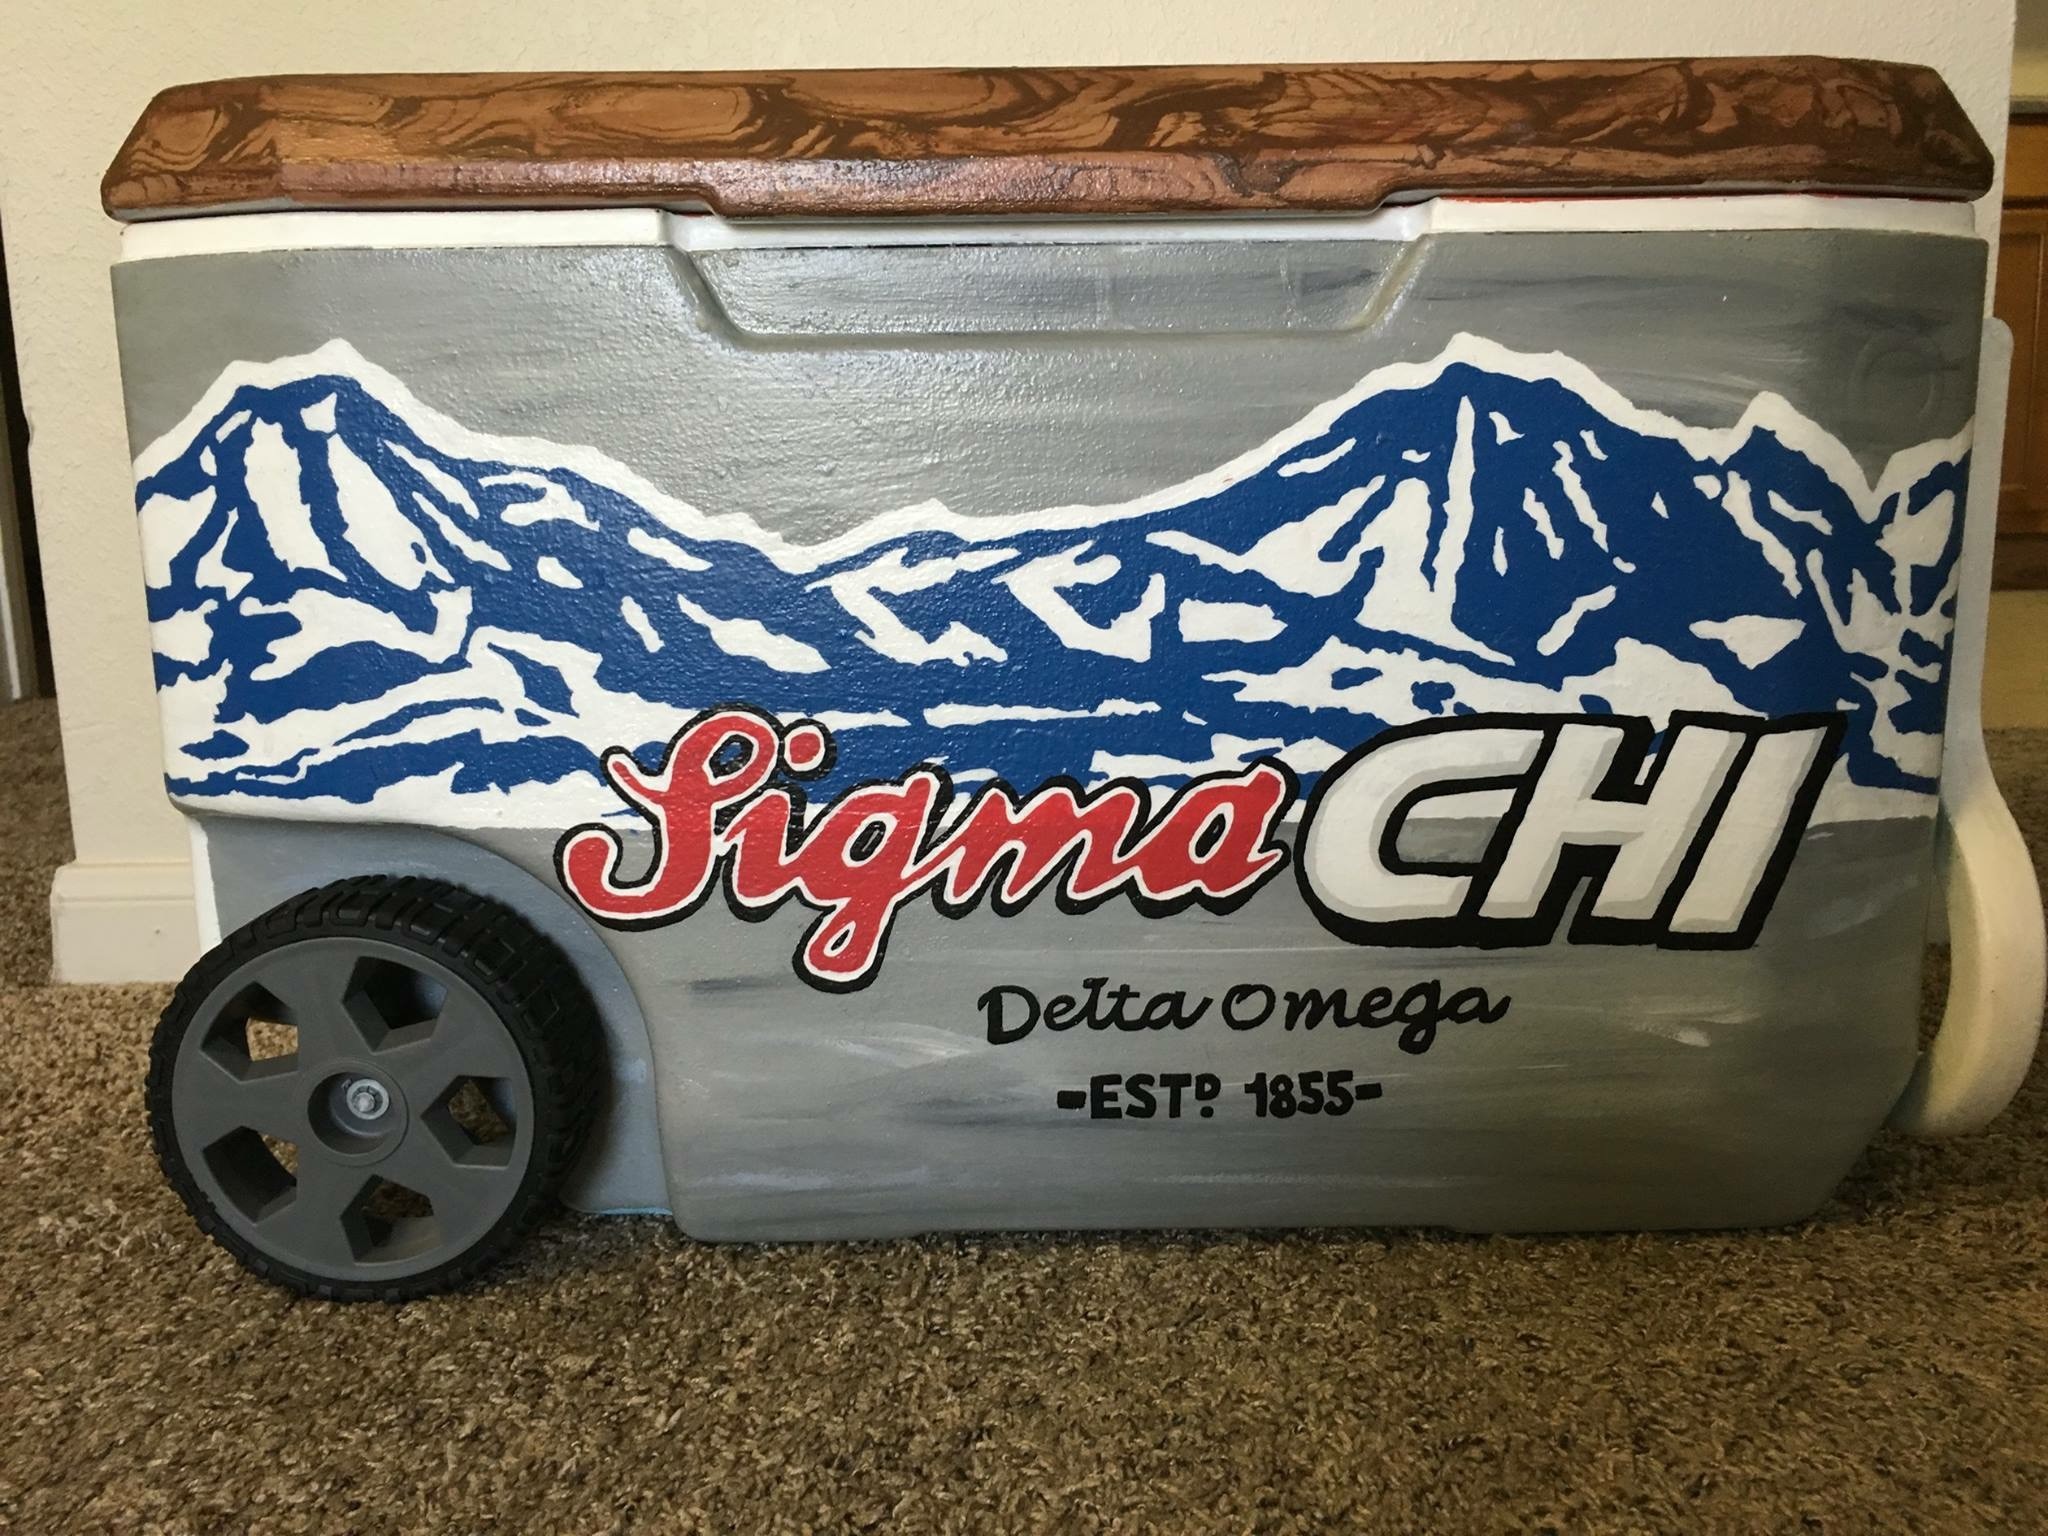 2048x1536 sigma chi beer fraternity cooler More